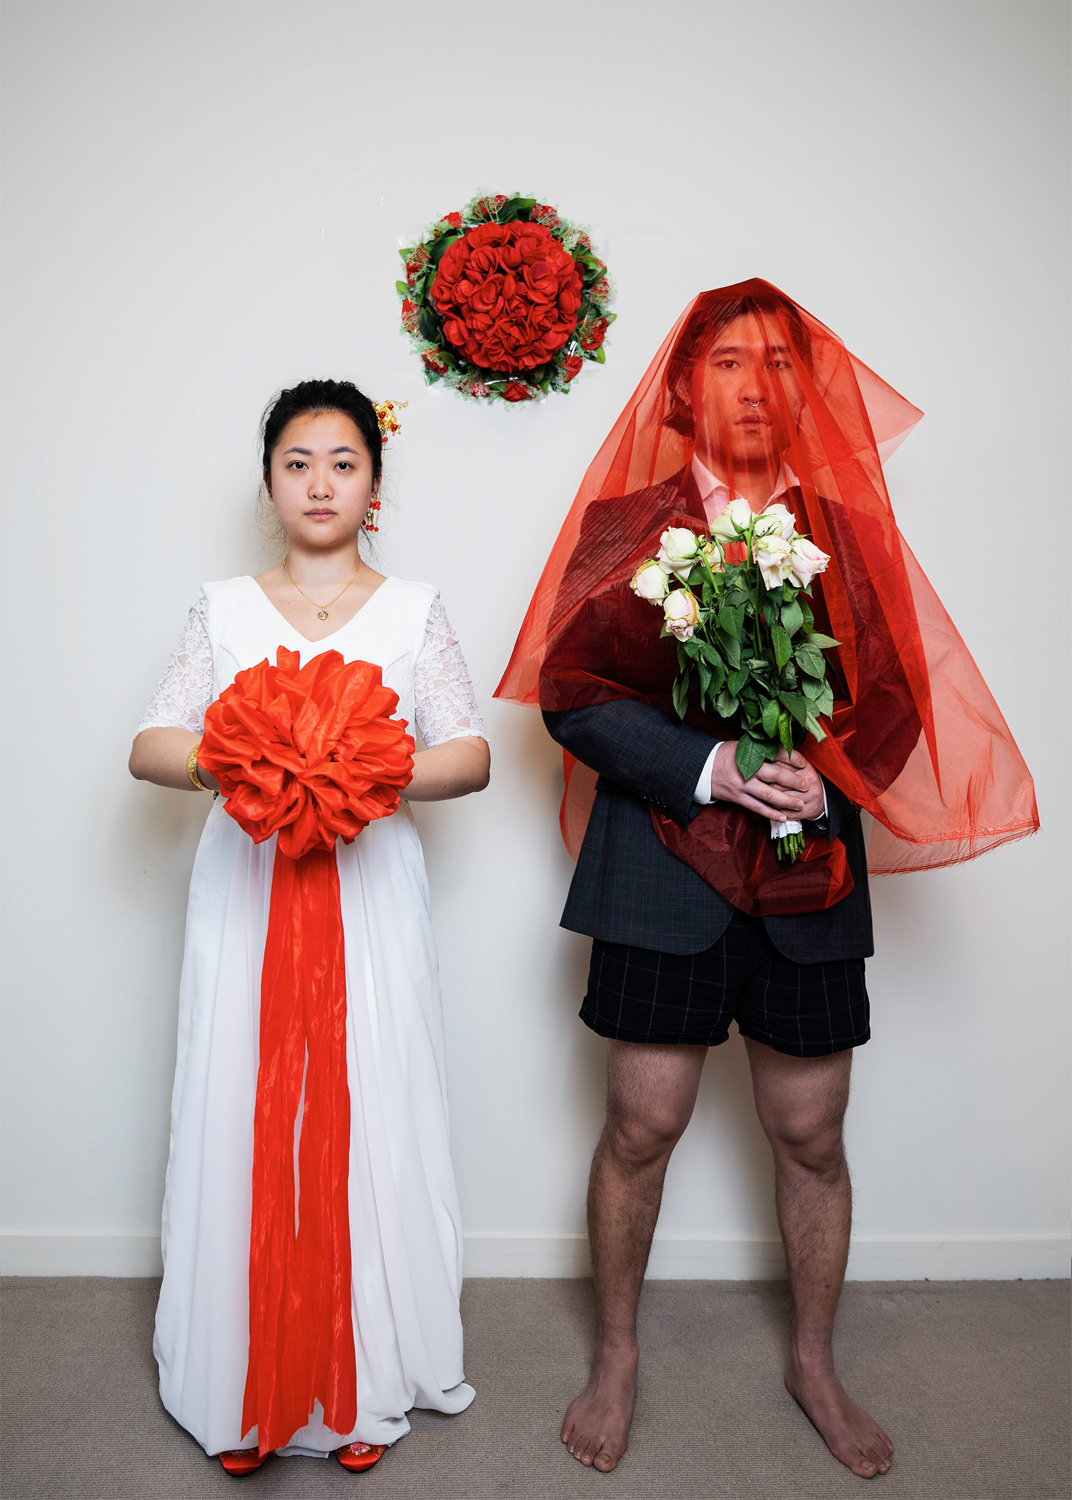 Wedding photo, Chinese culture, marriage, staged photography, self-portraiture.